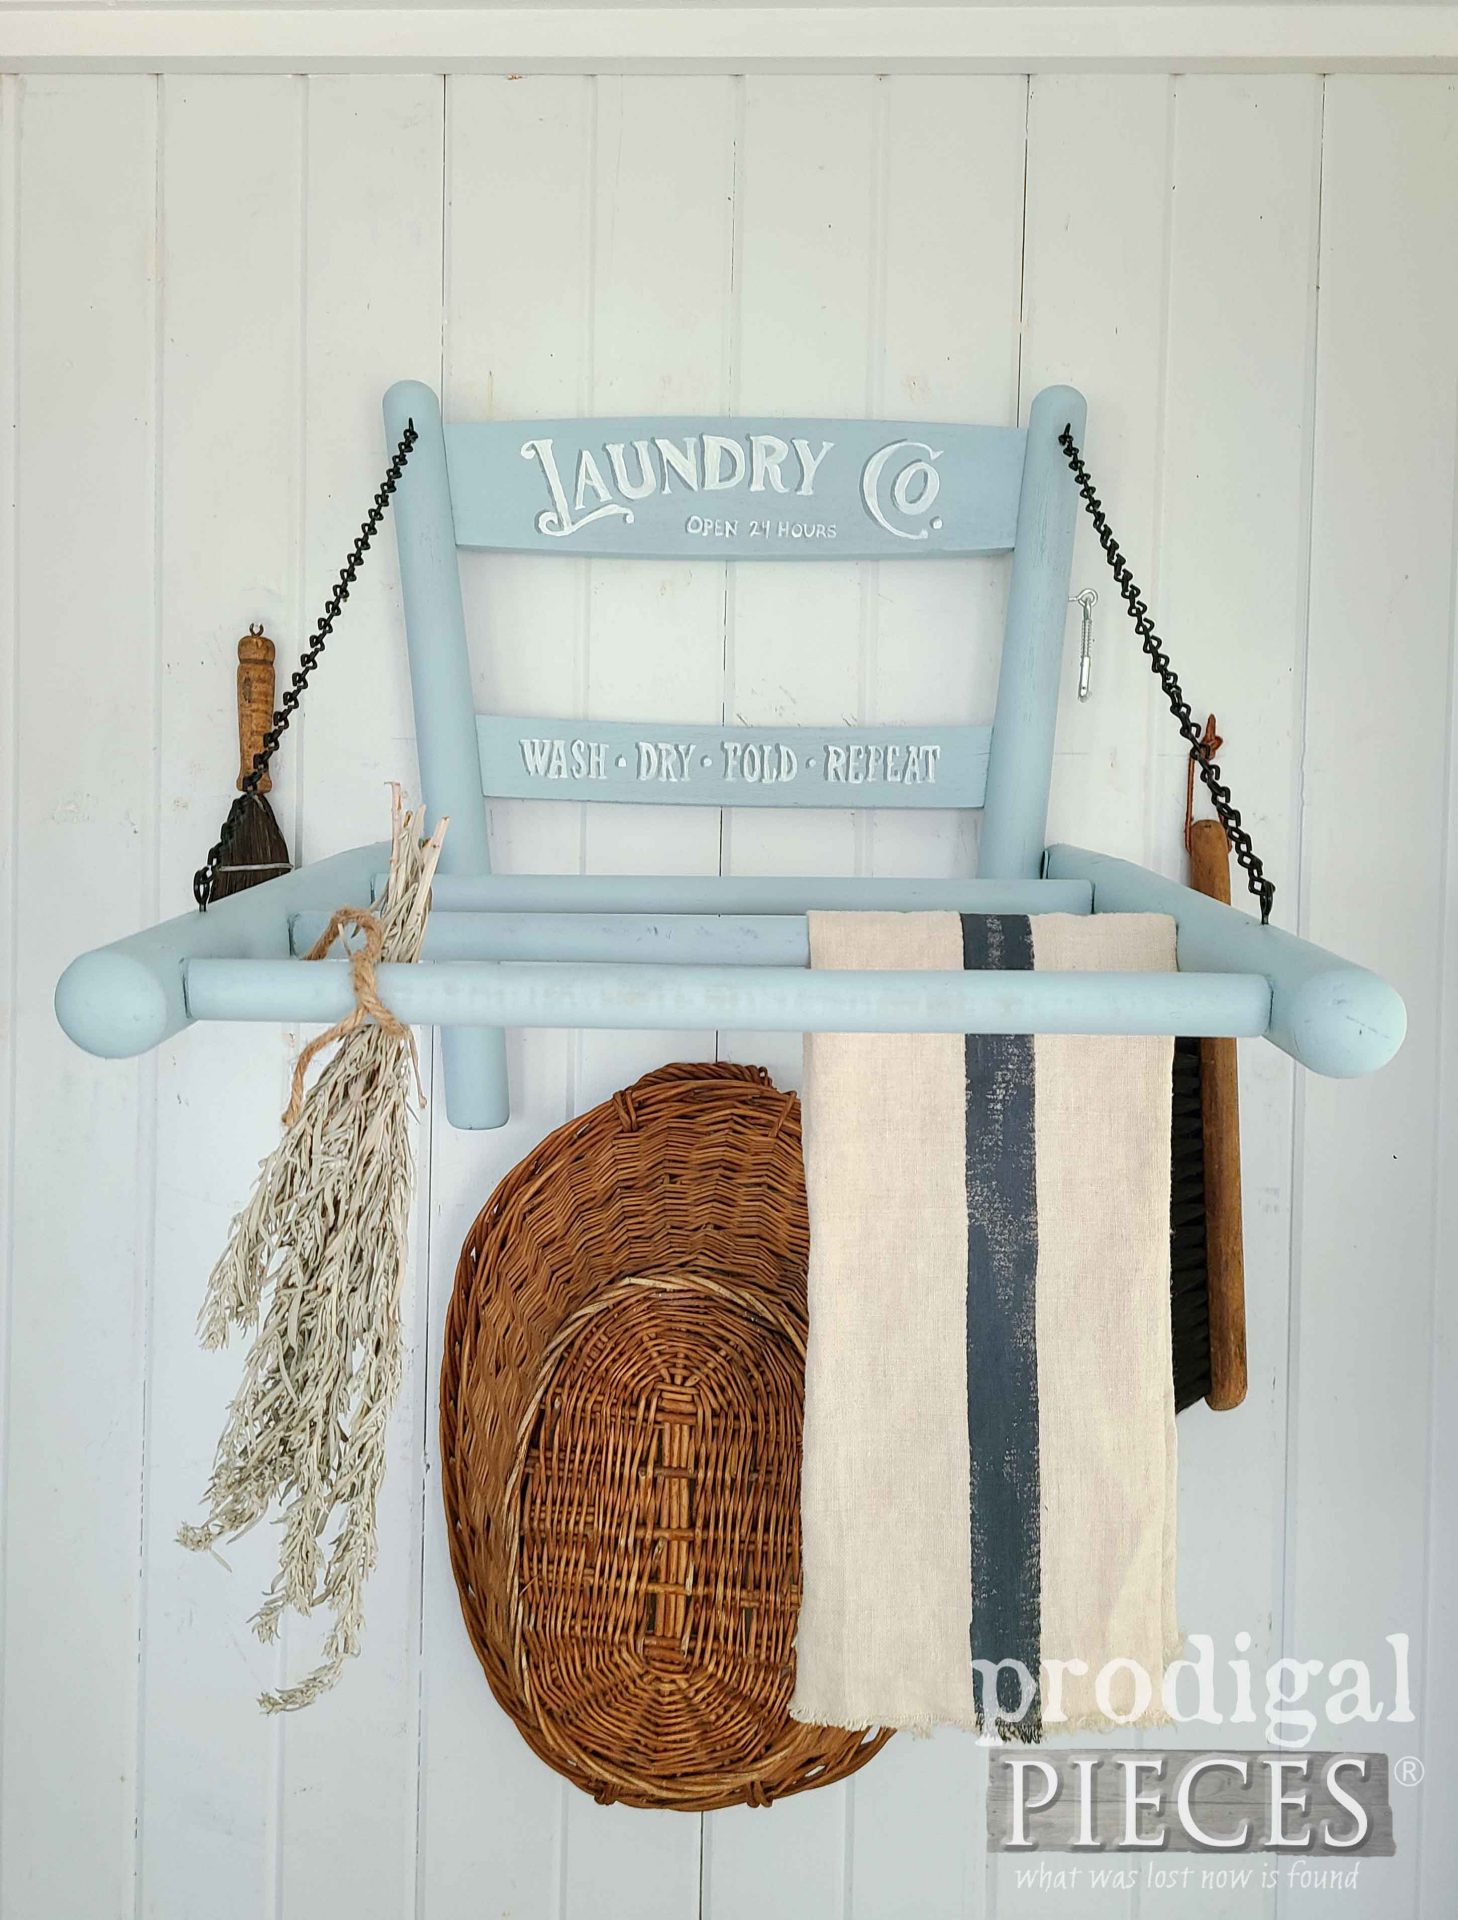 Farmhouse Laundry Drying Rack made from Vintage Caned Chair by Larissa of Prodigal Pieces | prodigalpieces.com #prodigalpieces #diy #upcycled #furniture